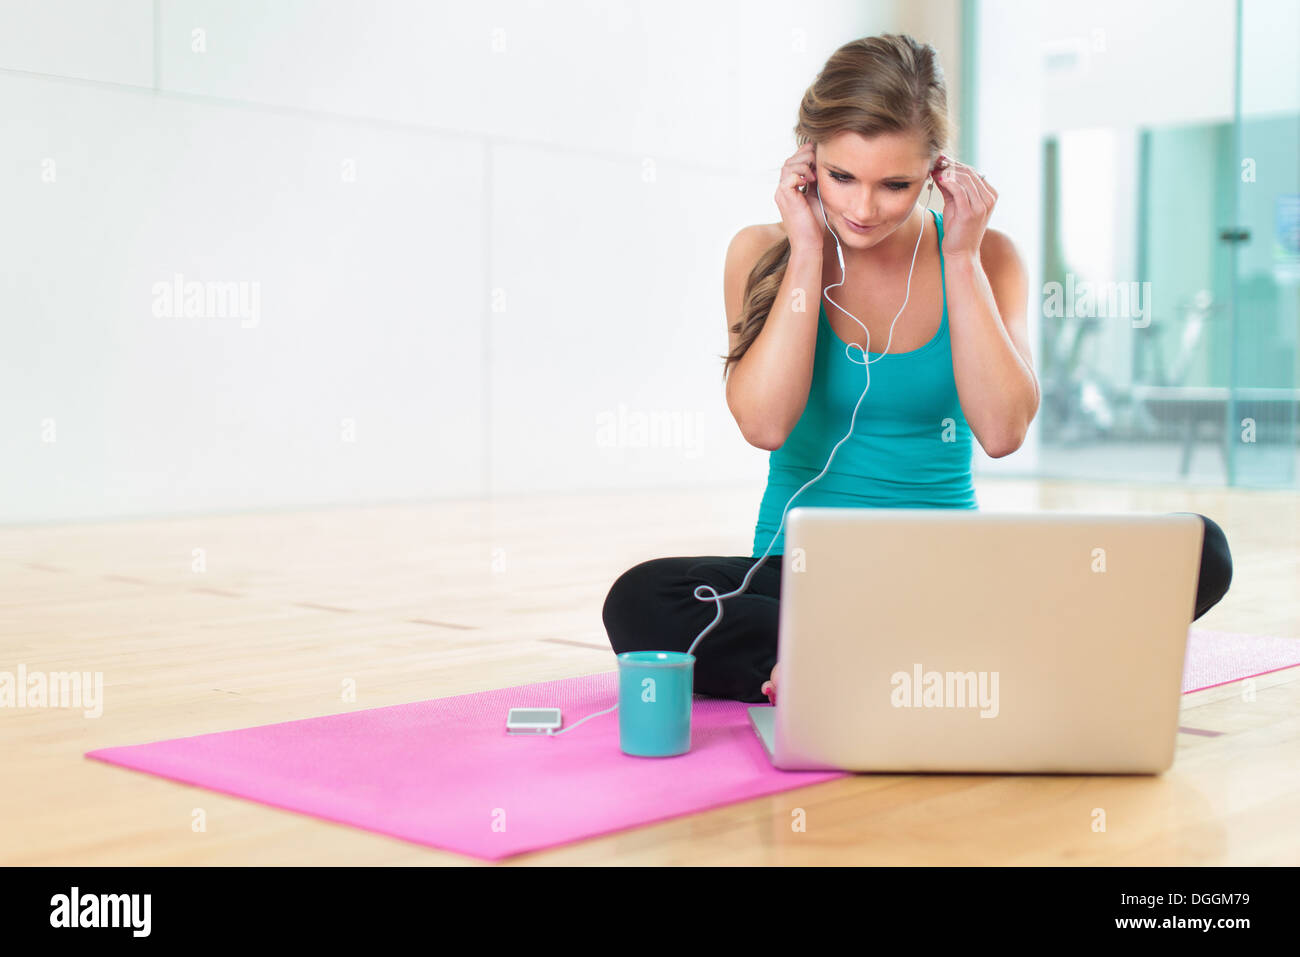 Young woman on yoga mat listening to smartphone Stock Photo